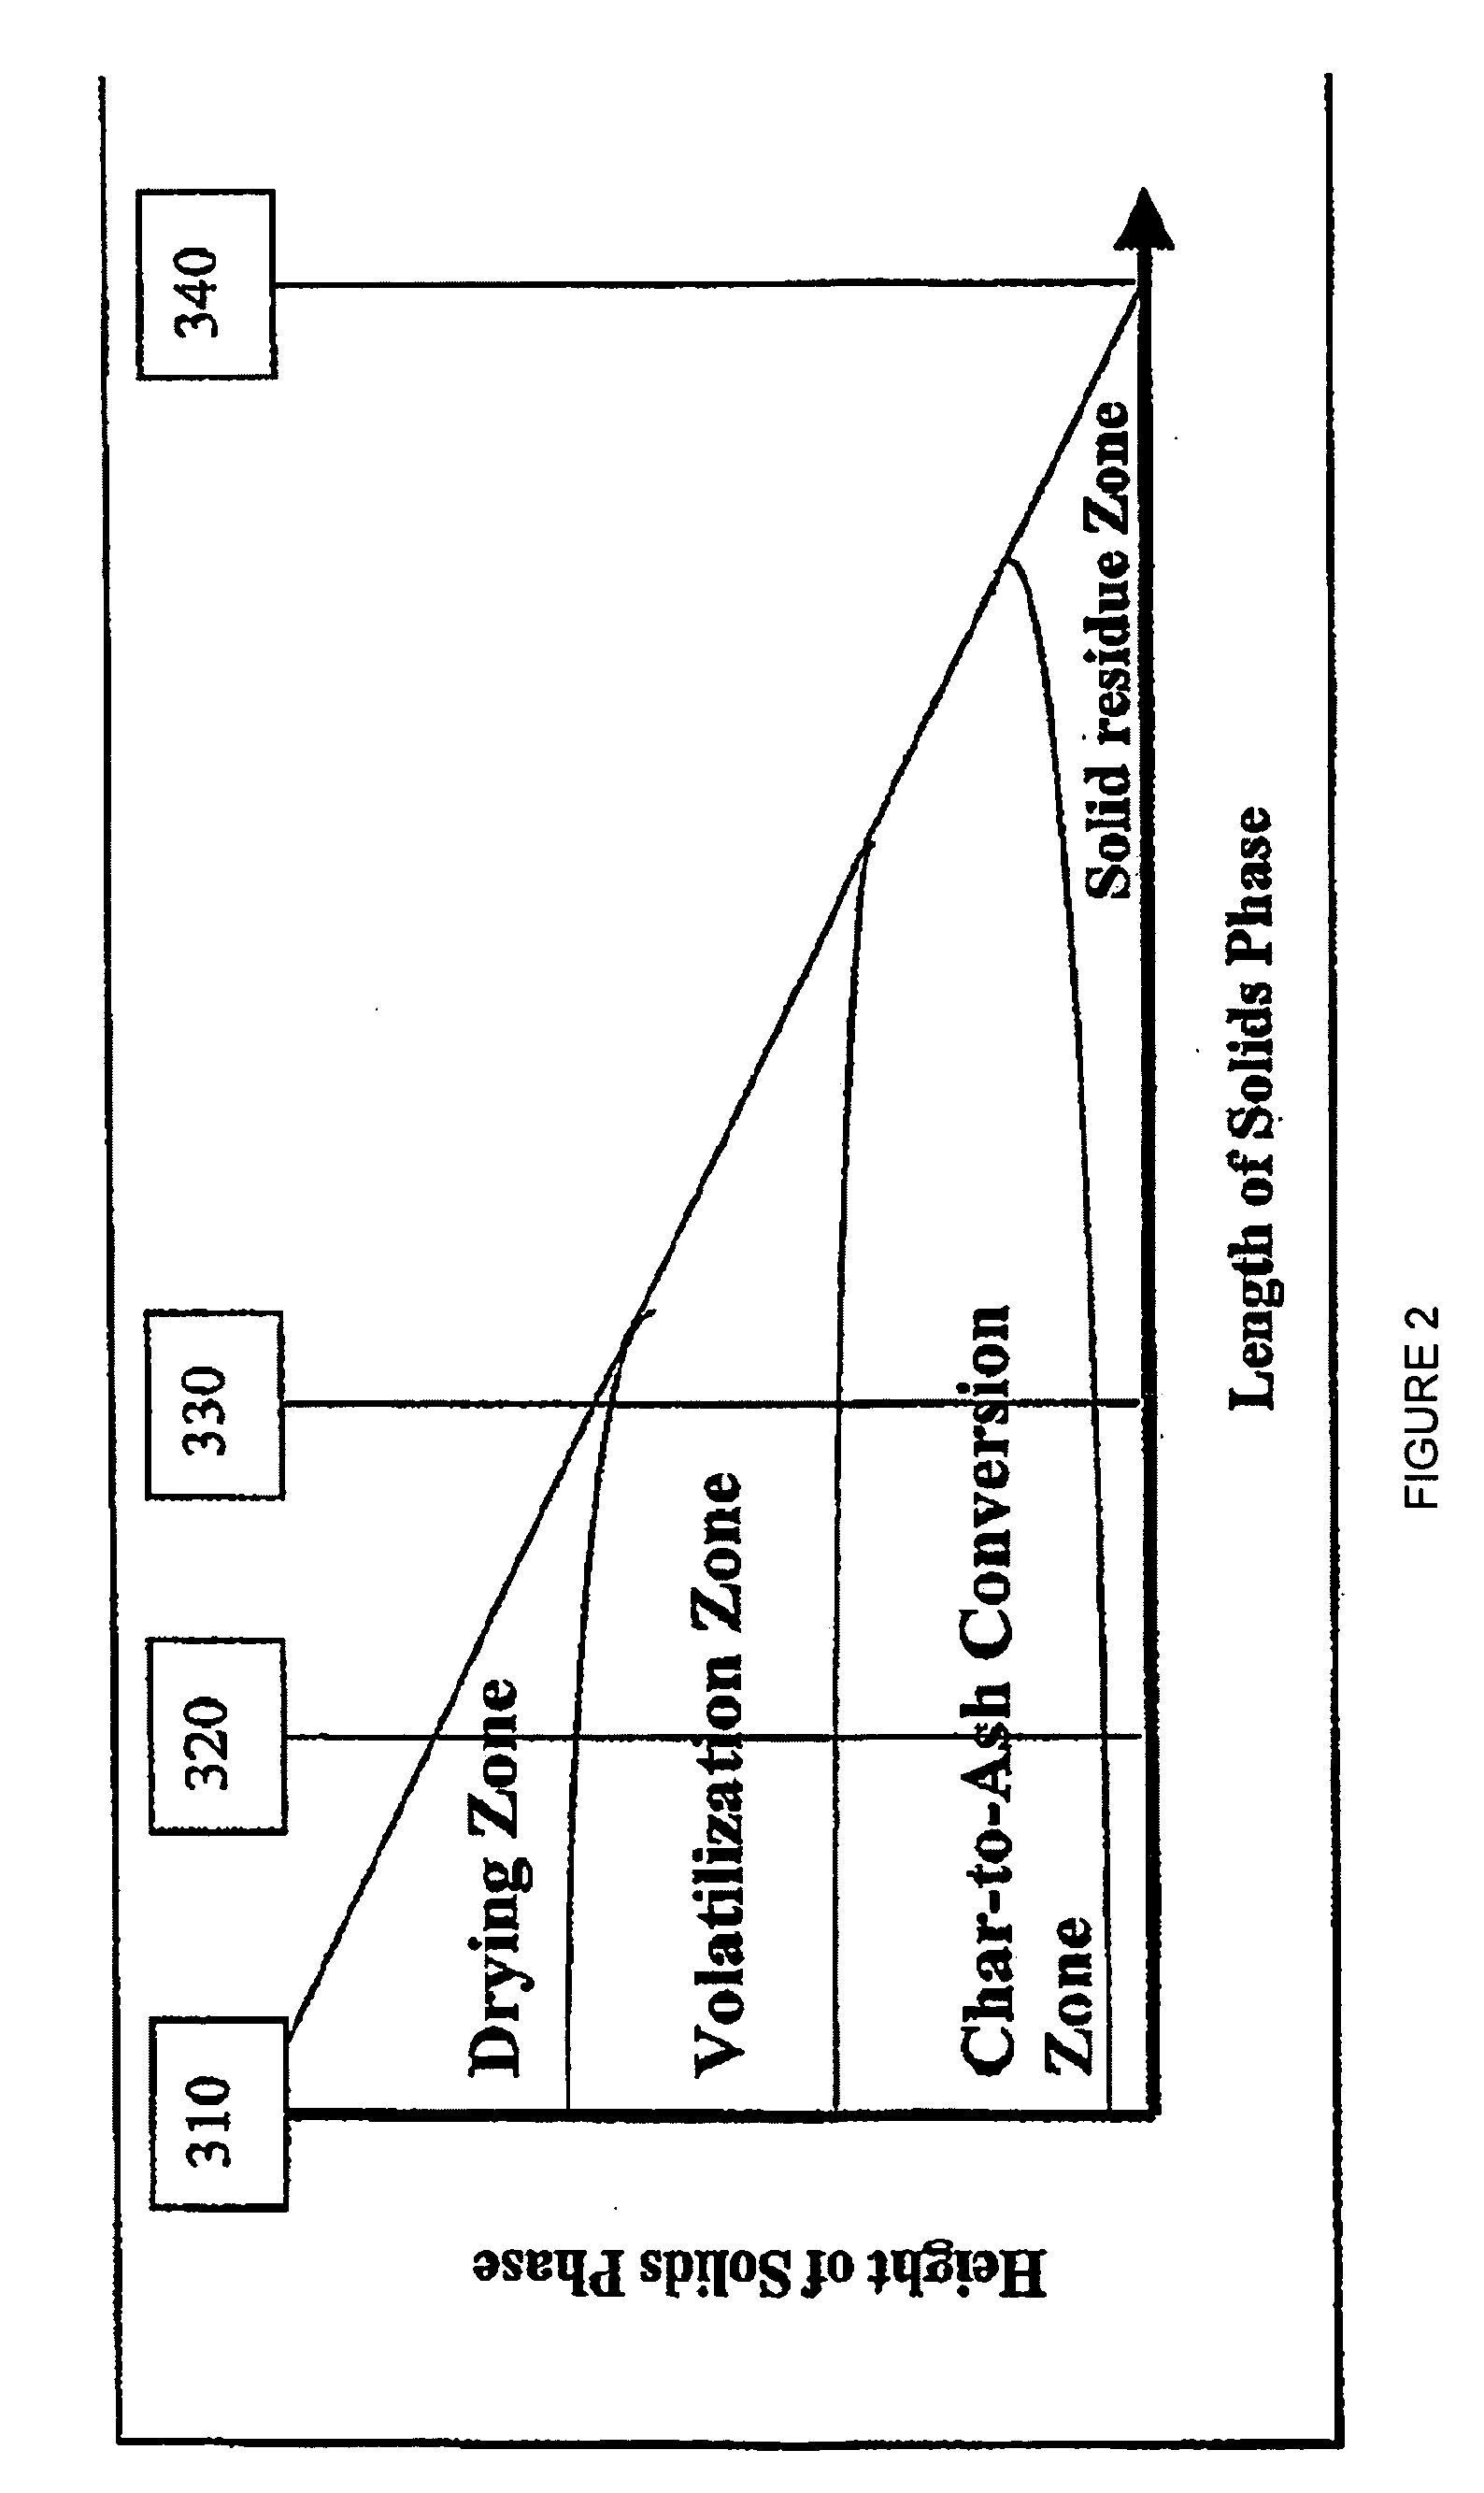 Low Temperature Gasification Facility with a Horizontally Oriented Gasifier